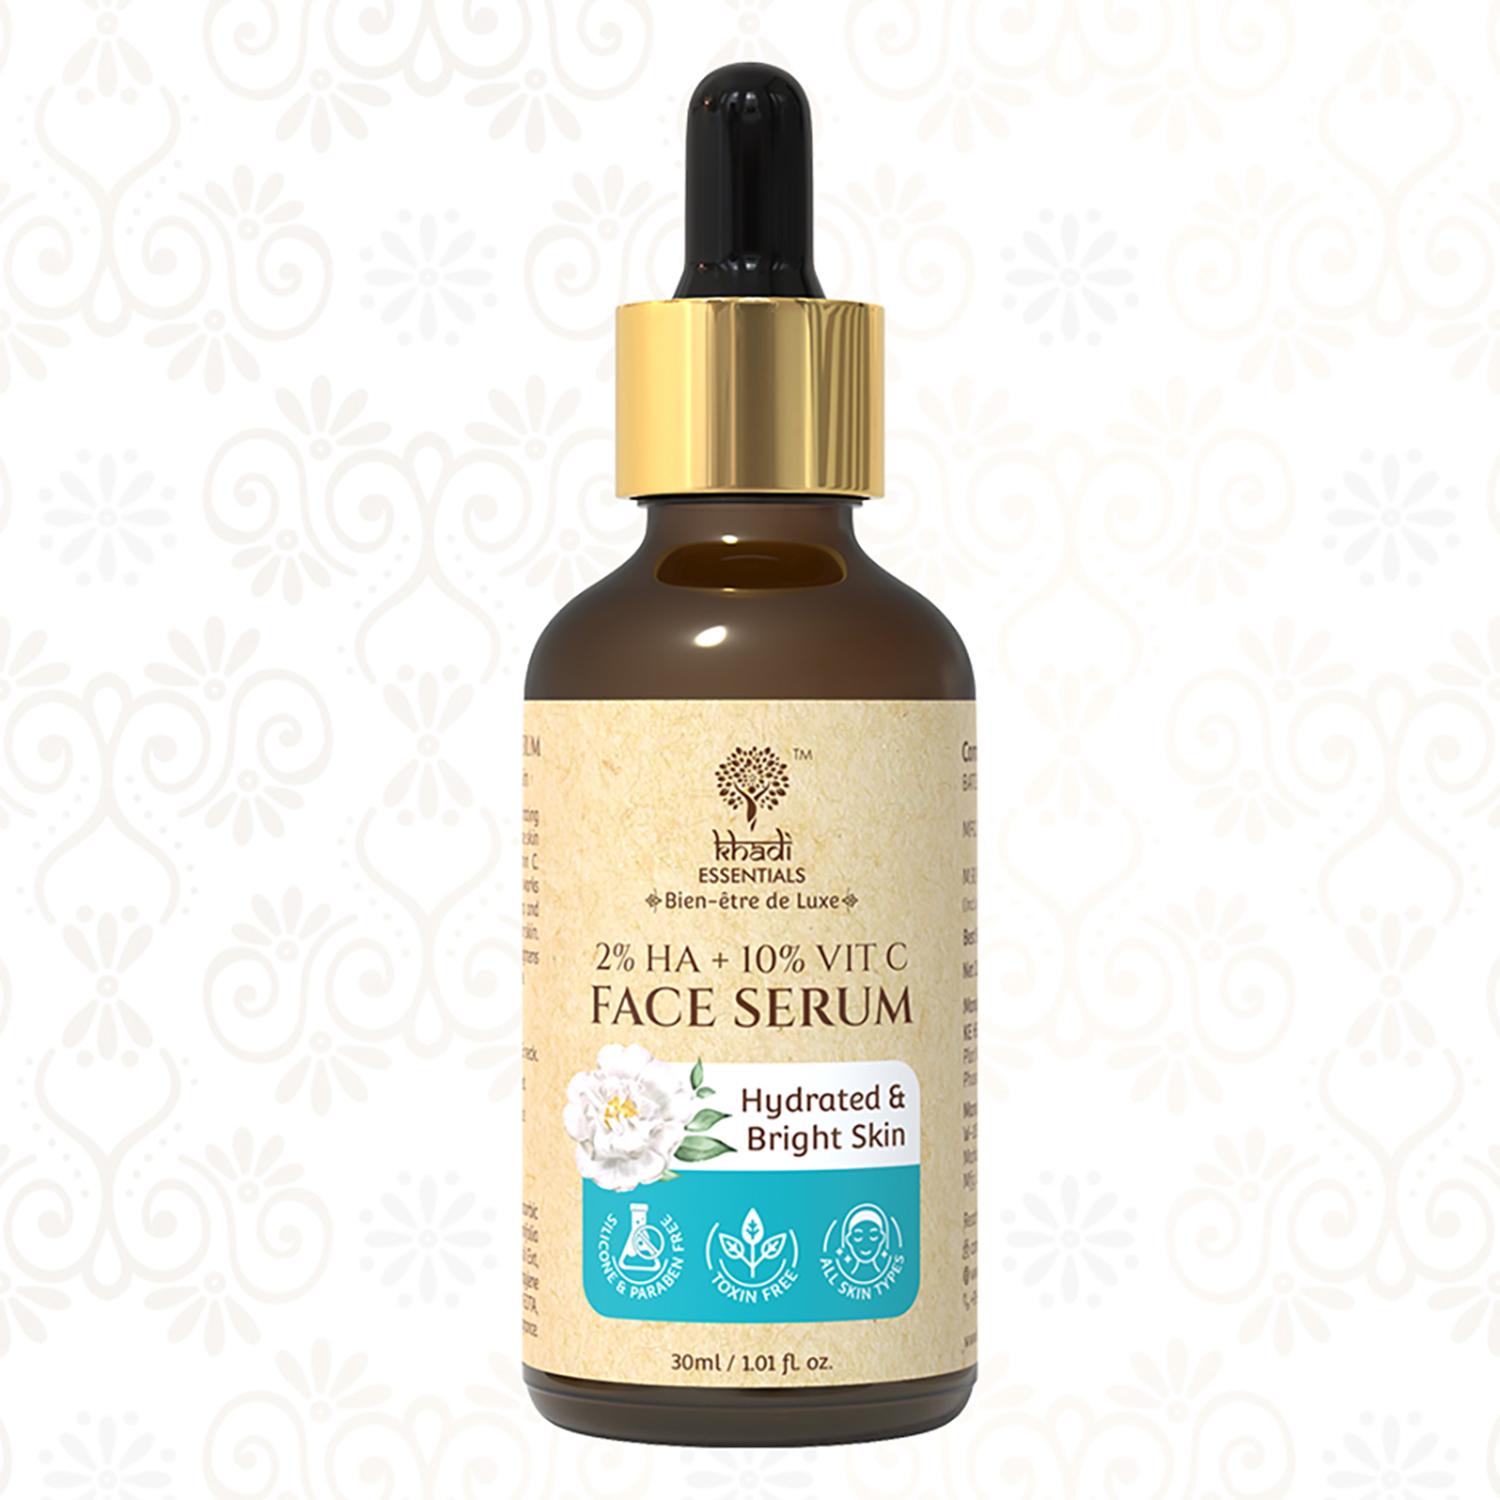 2% HA + 10% Vitamin C Face Serum with Tea Tree Extracts For Hydrated & Bright Skin